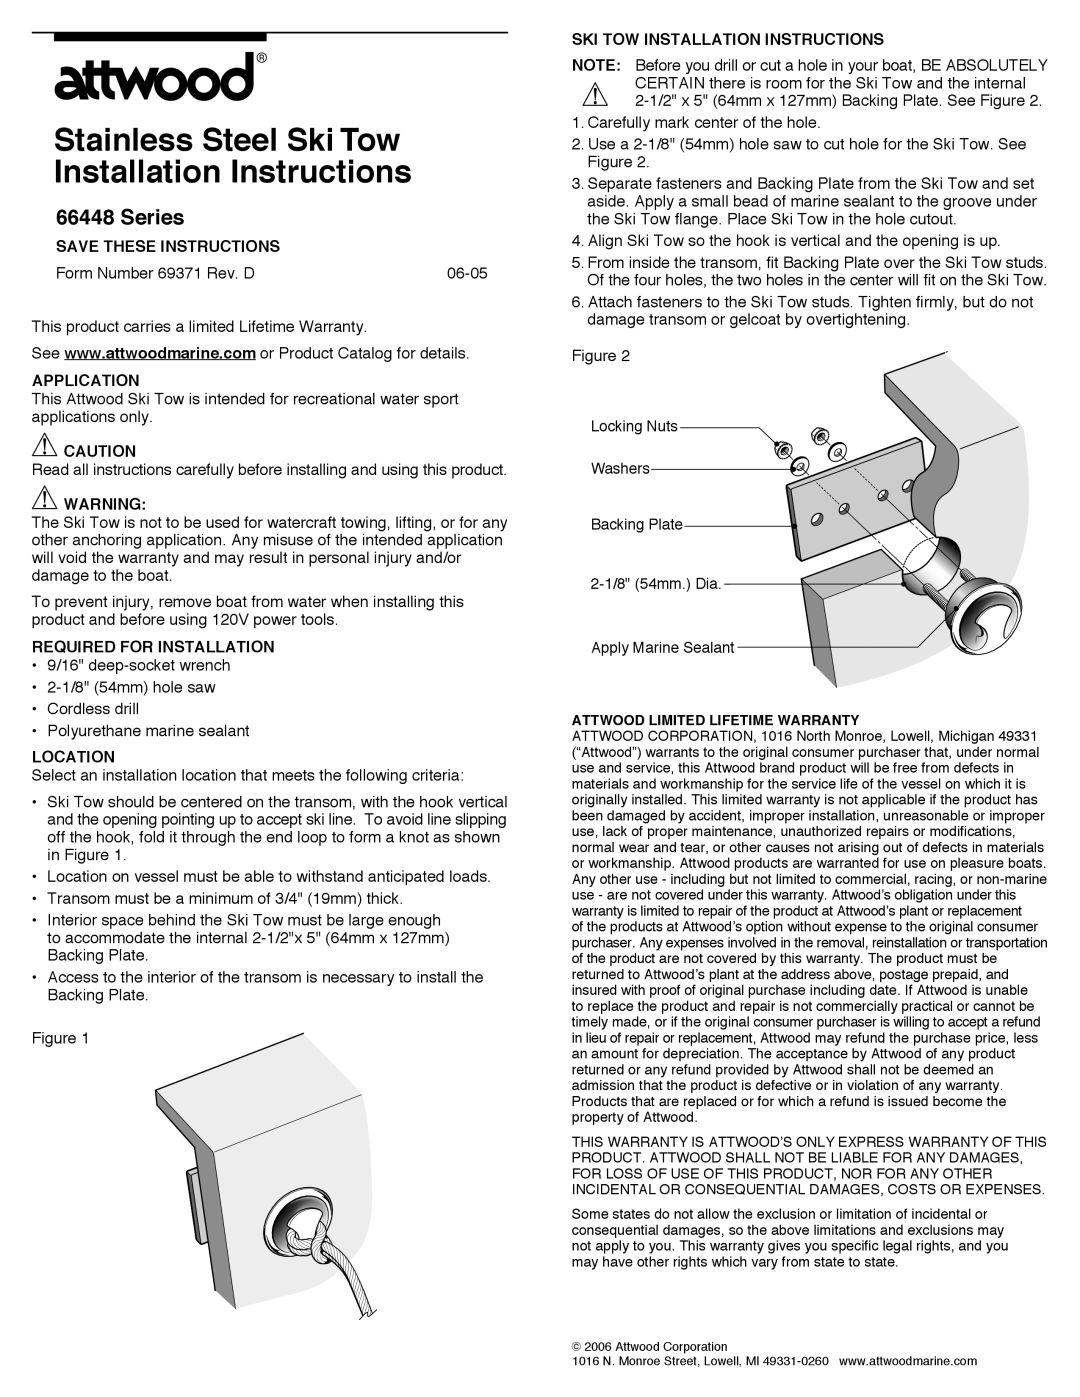 Attwood 66448 Series, 69371 installation instructions Application, Required for Installation, Location 